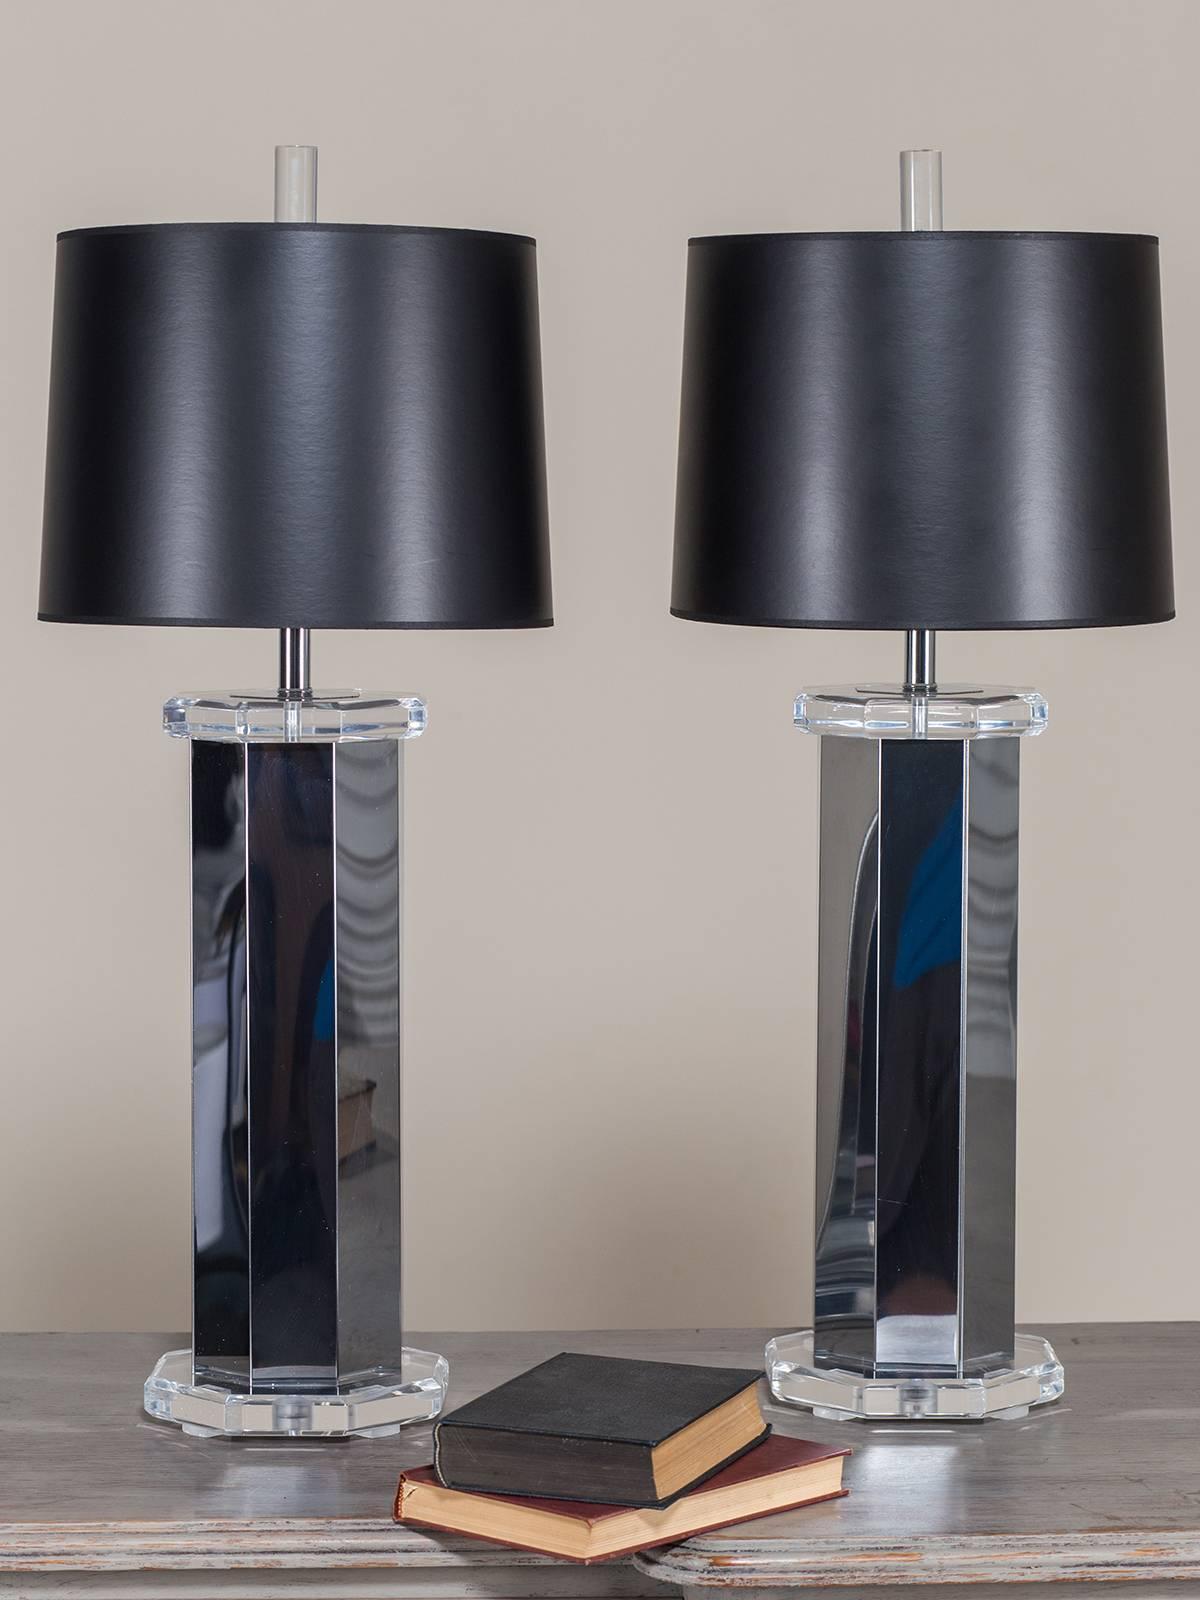 This pair of vintage Italian lamps circa 1975 combine two modern materials, chrome and Lucite, to give a striking contemporary appearance. Each lamp stands upon an eight sided octagonal base and supports a column of chromed metal also with eight